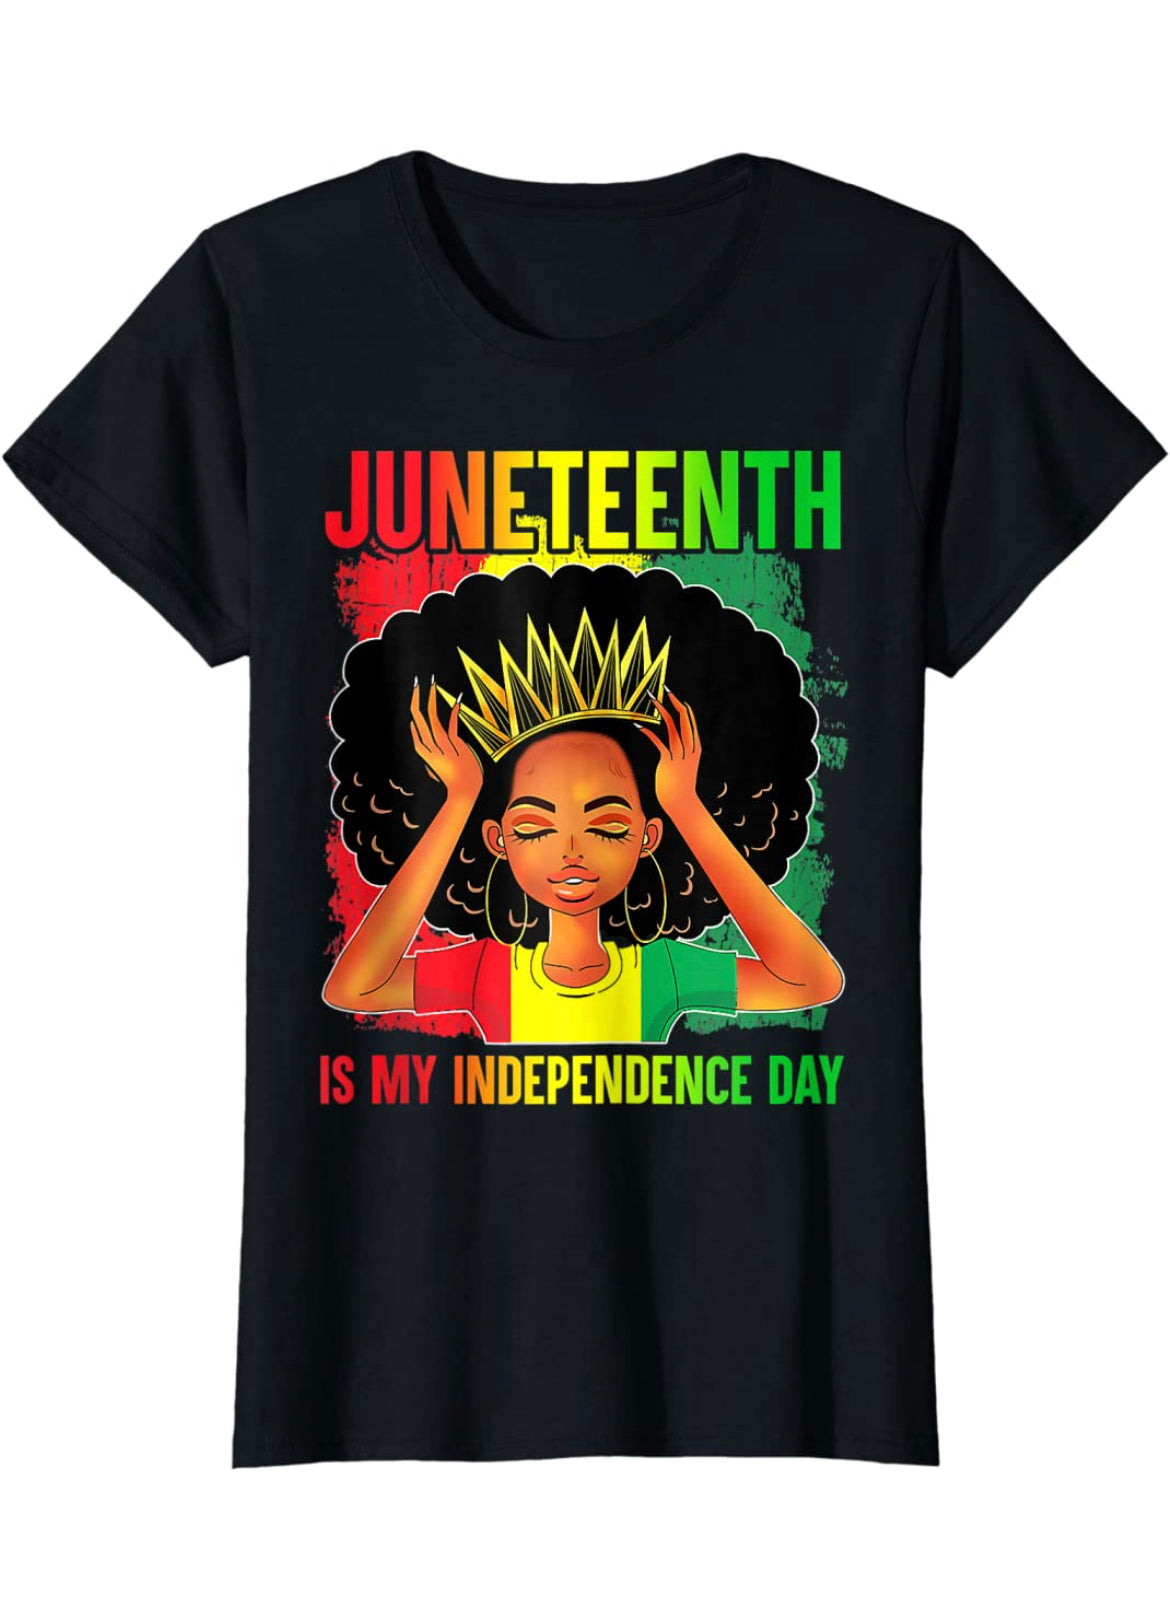 Final Sale Plus Size "Juneteenth Is My Independence Day" T-Shirt in Black